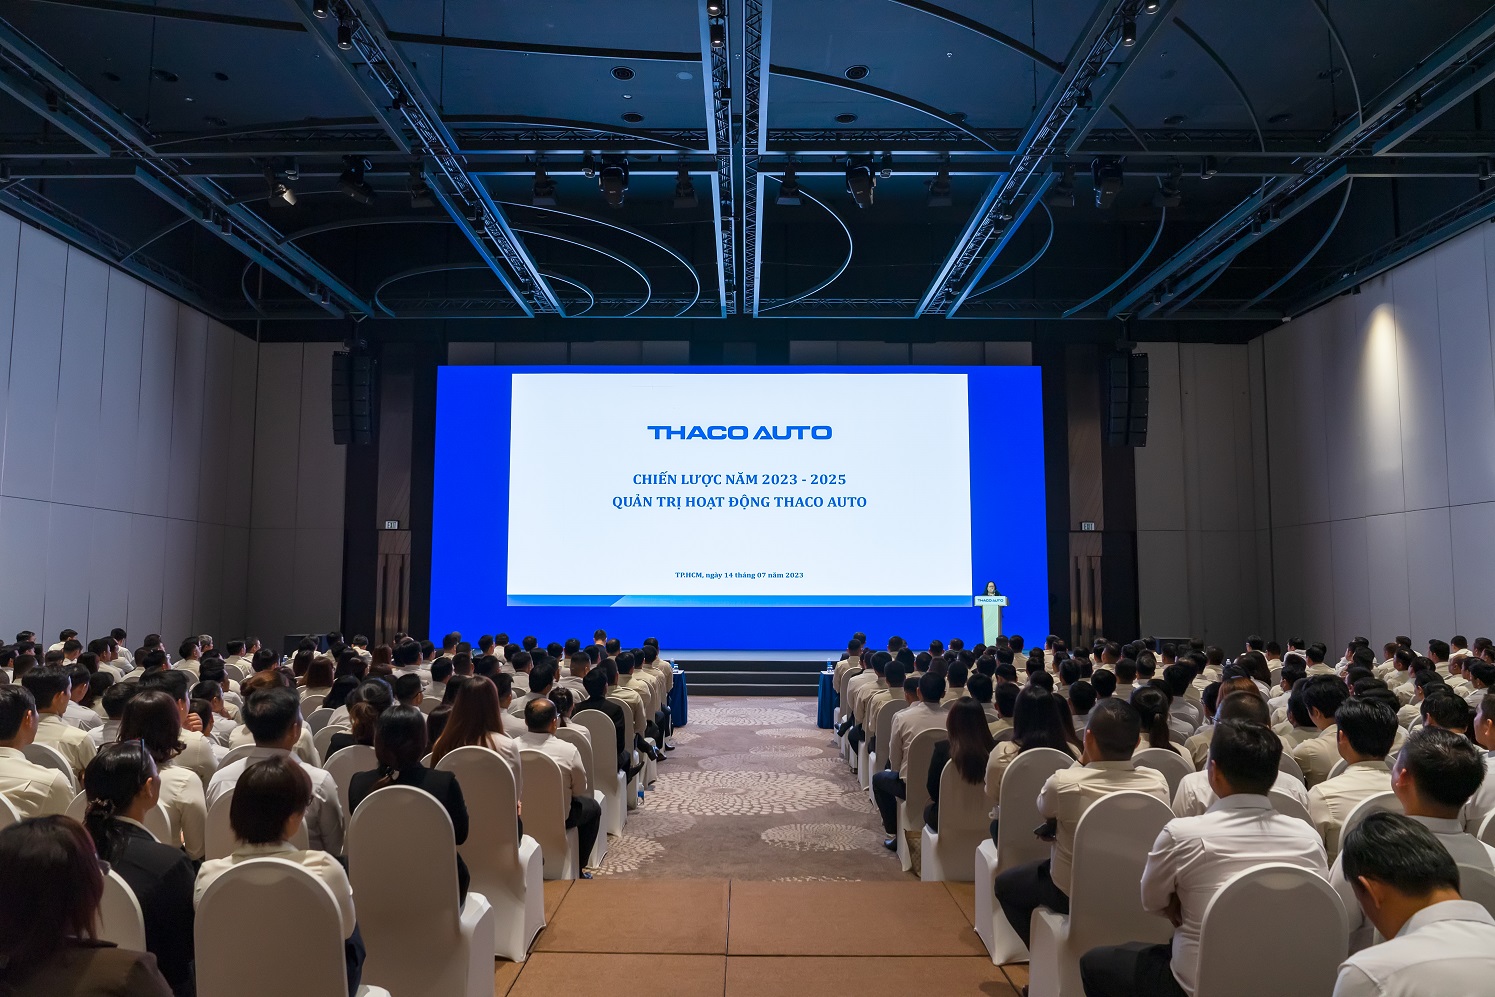 THACO AUTO Business Plan Conference for Third Quarter and Second Half of 2023 in Southern and Northern Vietnam